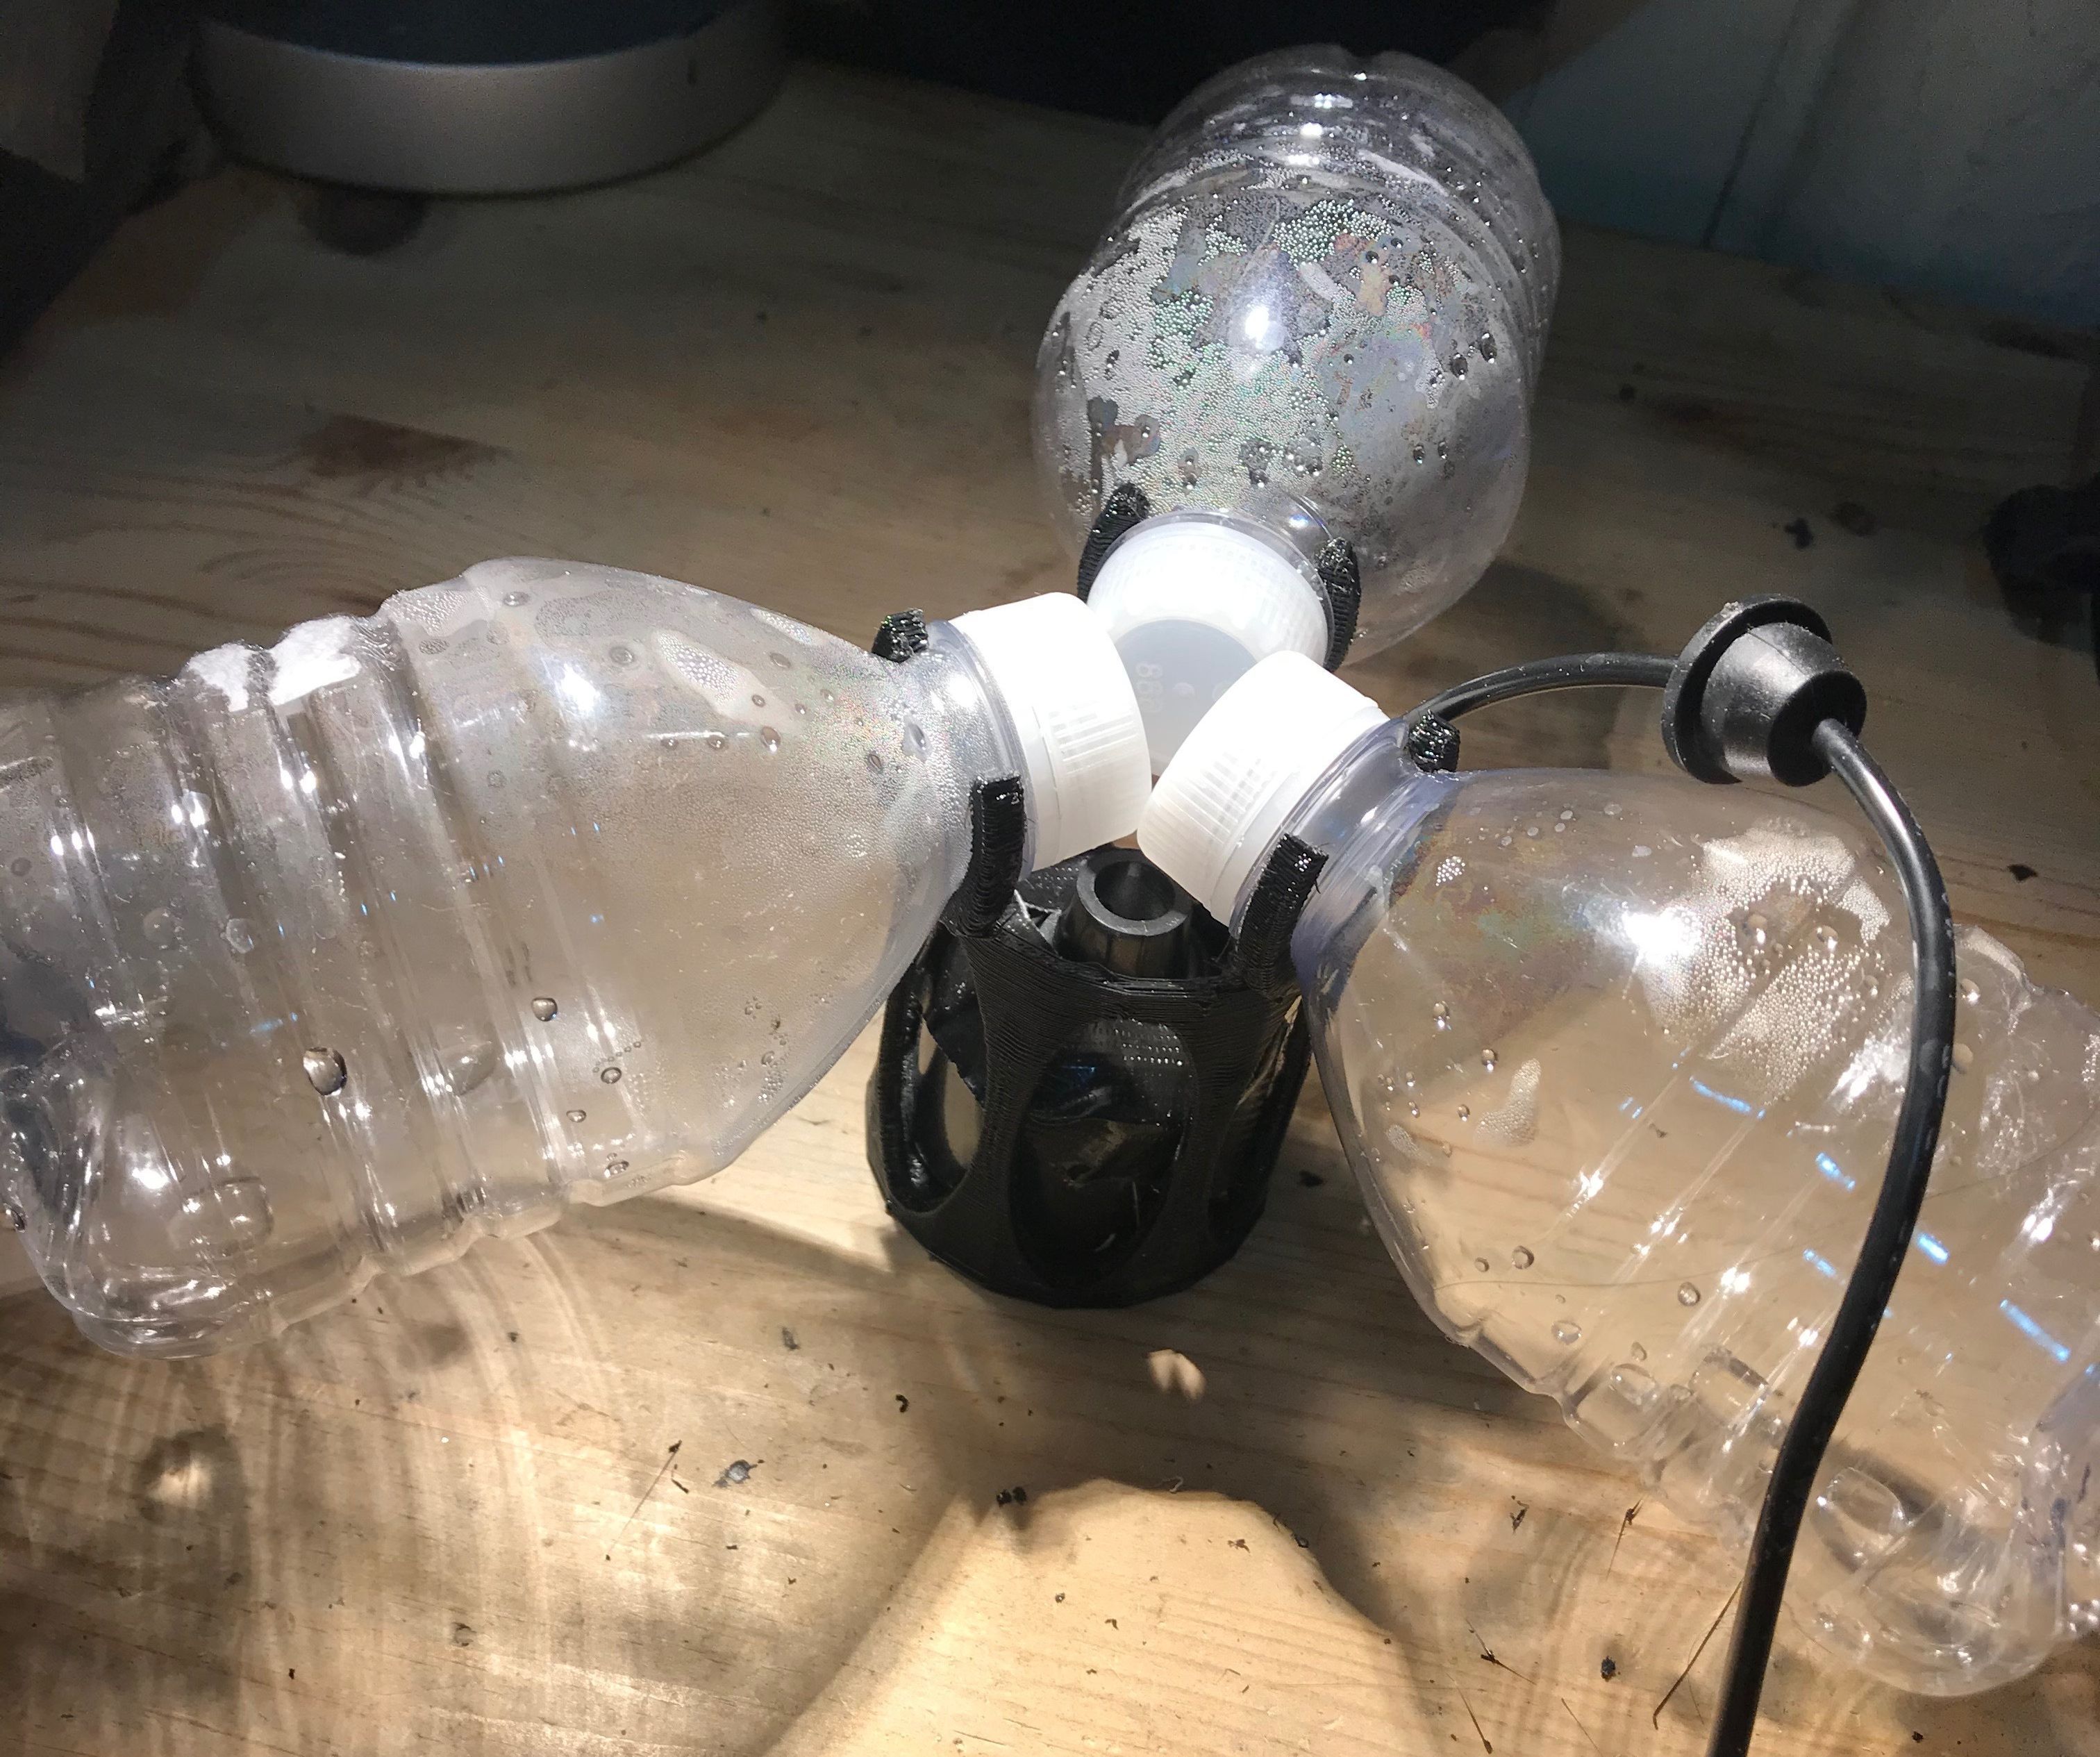 Mist Floater Out of Recycled Bottles